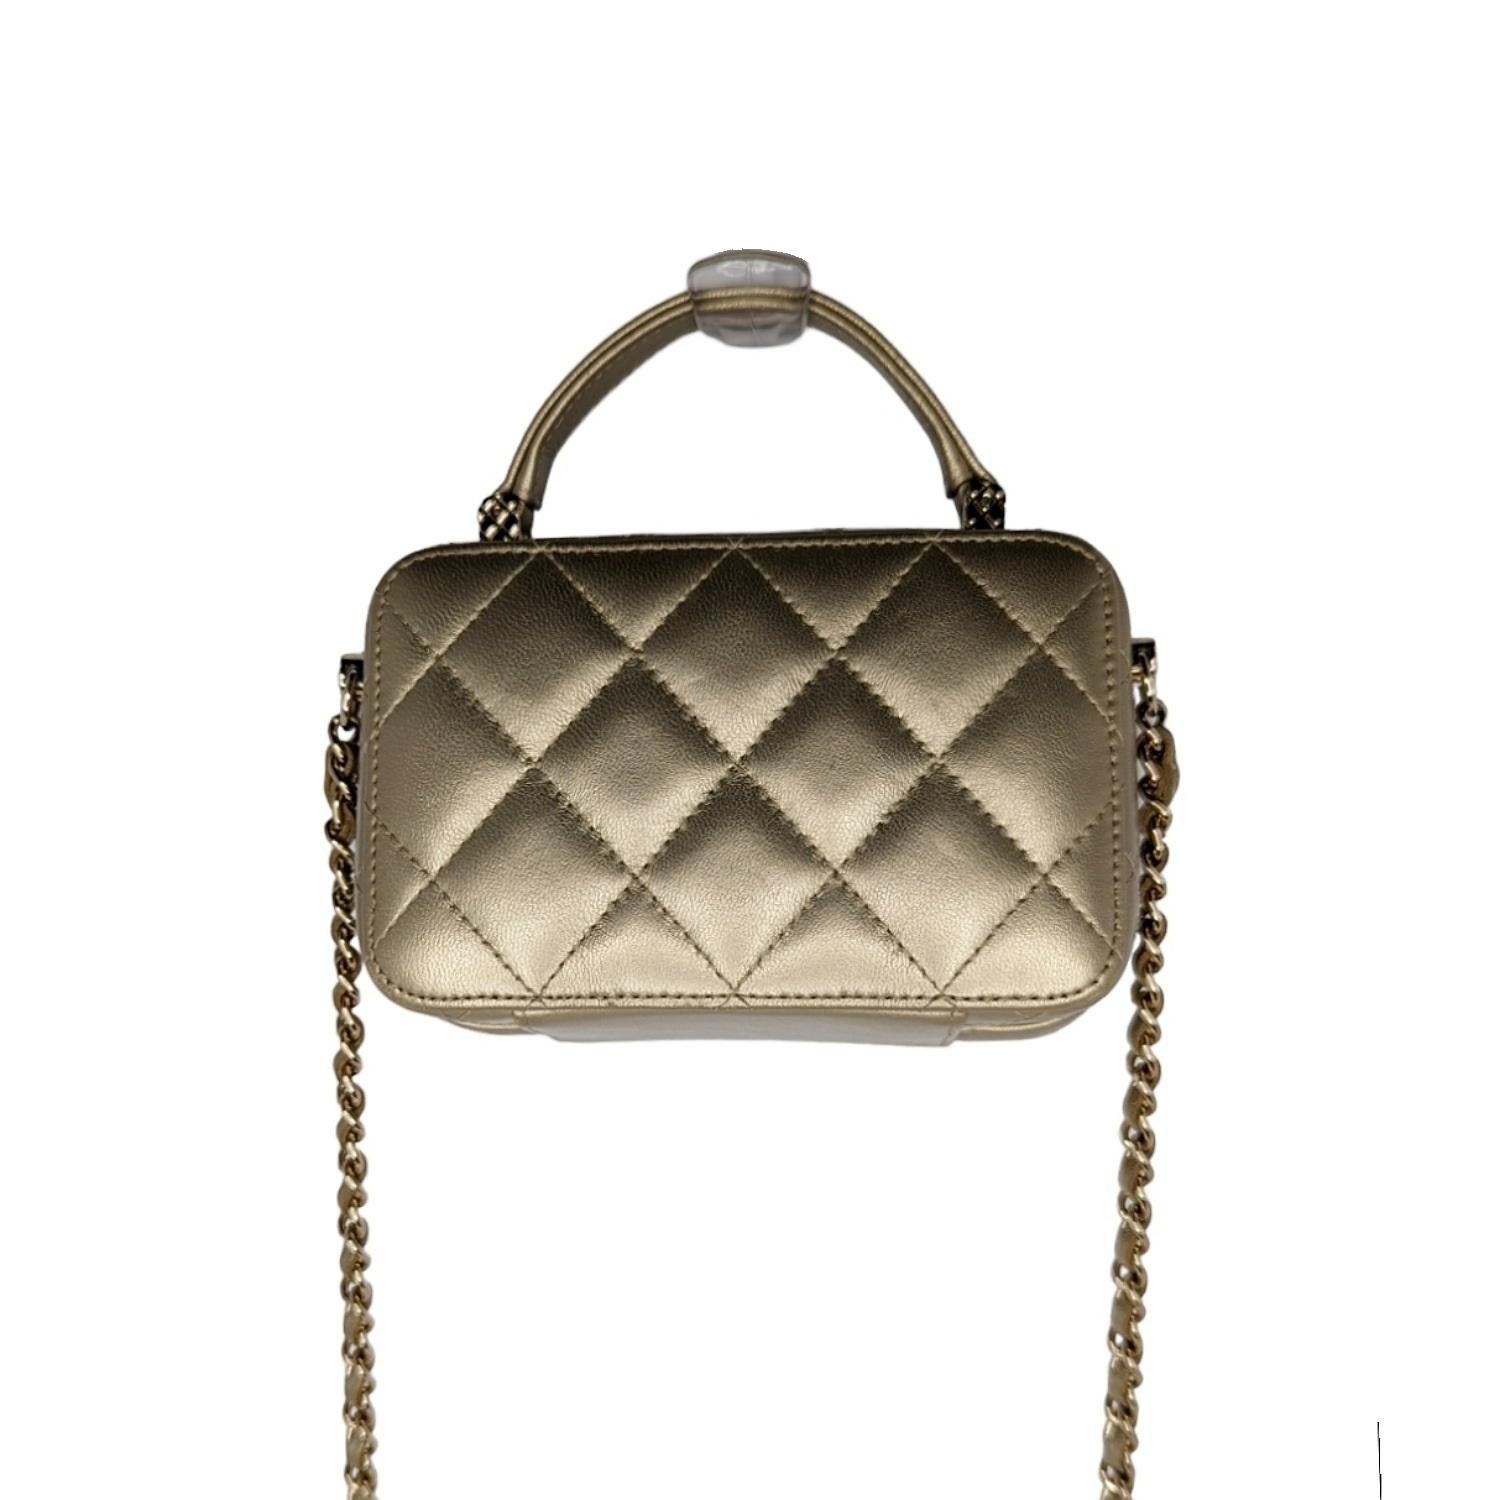 Chanel Metallic Quilted Top Handle Vanity Case in Gold. This chic stylish Chanel bag is crafted of luxurious lambskin leather. The elegant shoulder bag features the signature gold and threaded leather chain with a shoulder pad. Retail